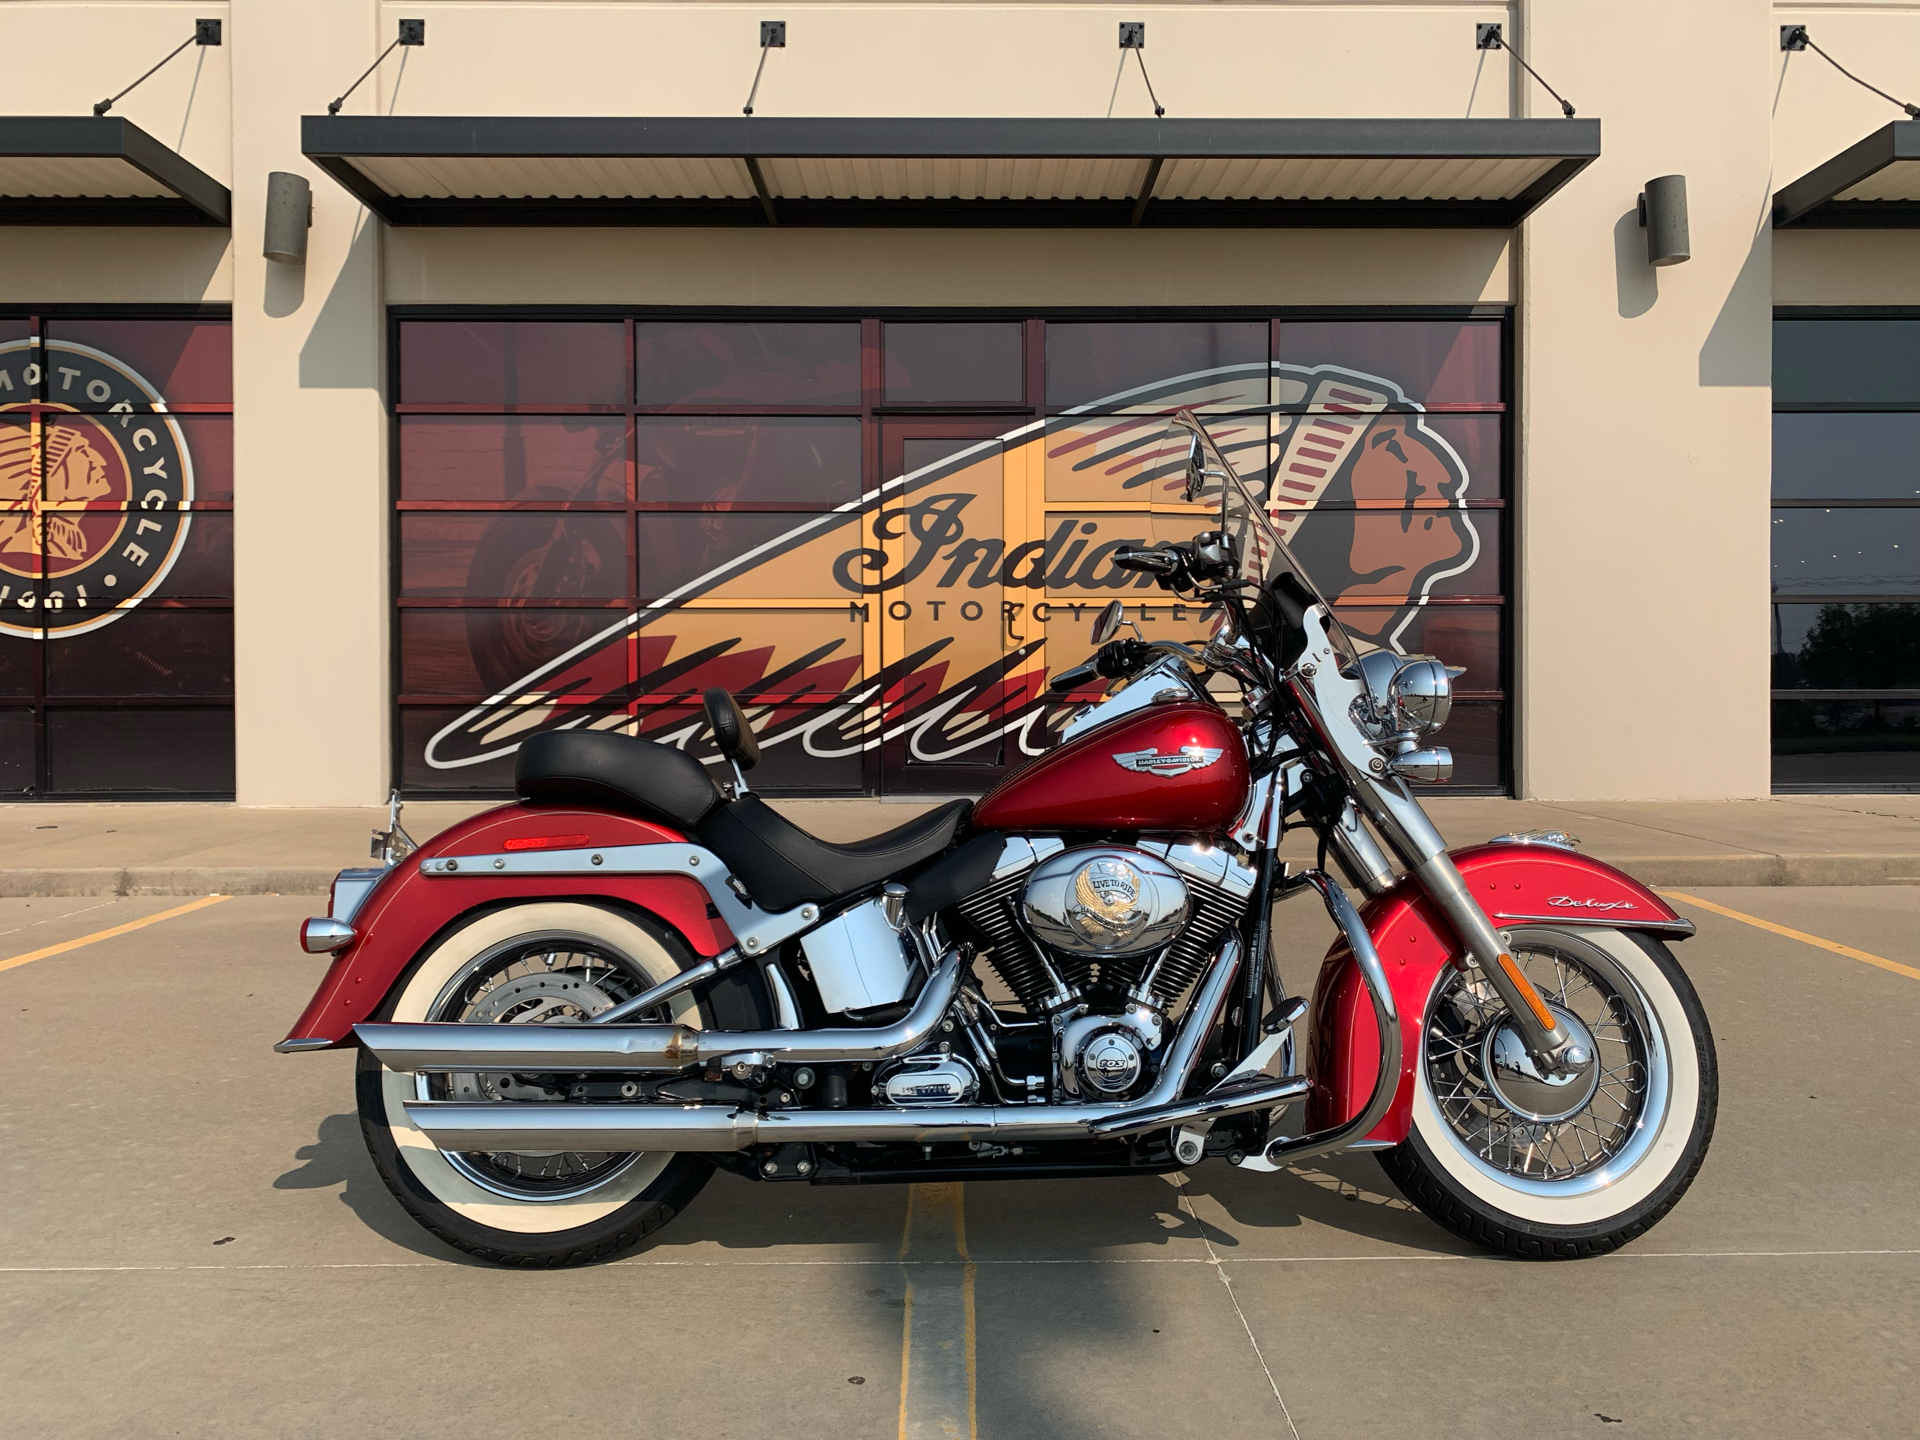 2012 Harley Davidson Softail Deluxe Motorcycles Norman Oklahoma 035480